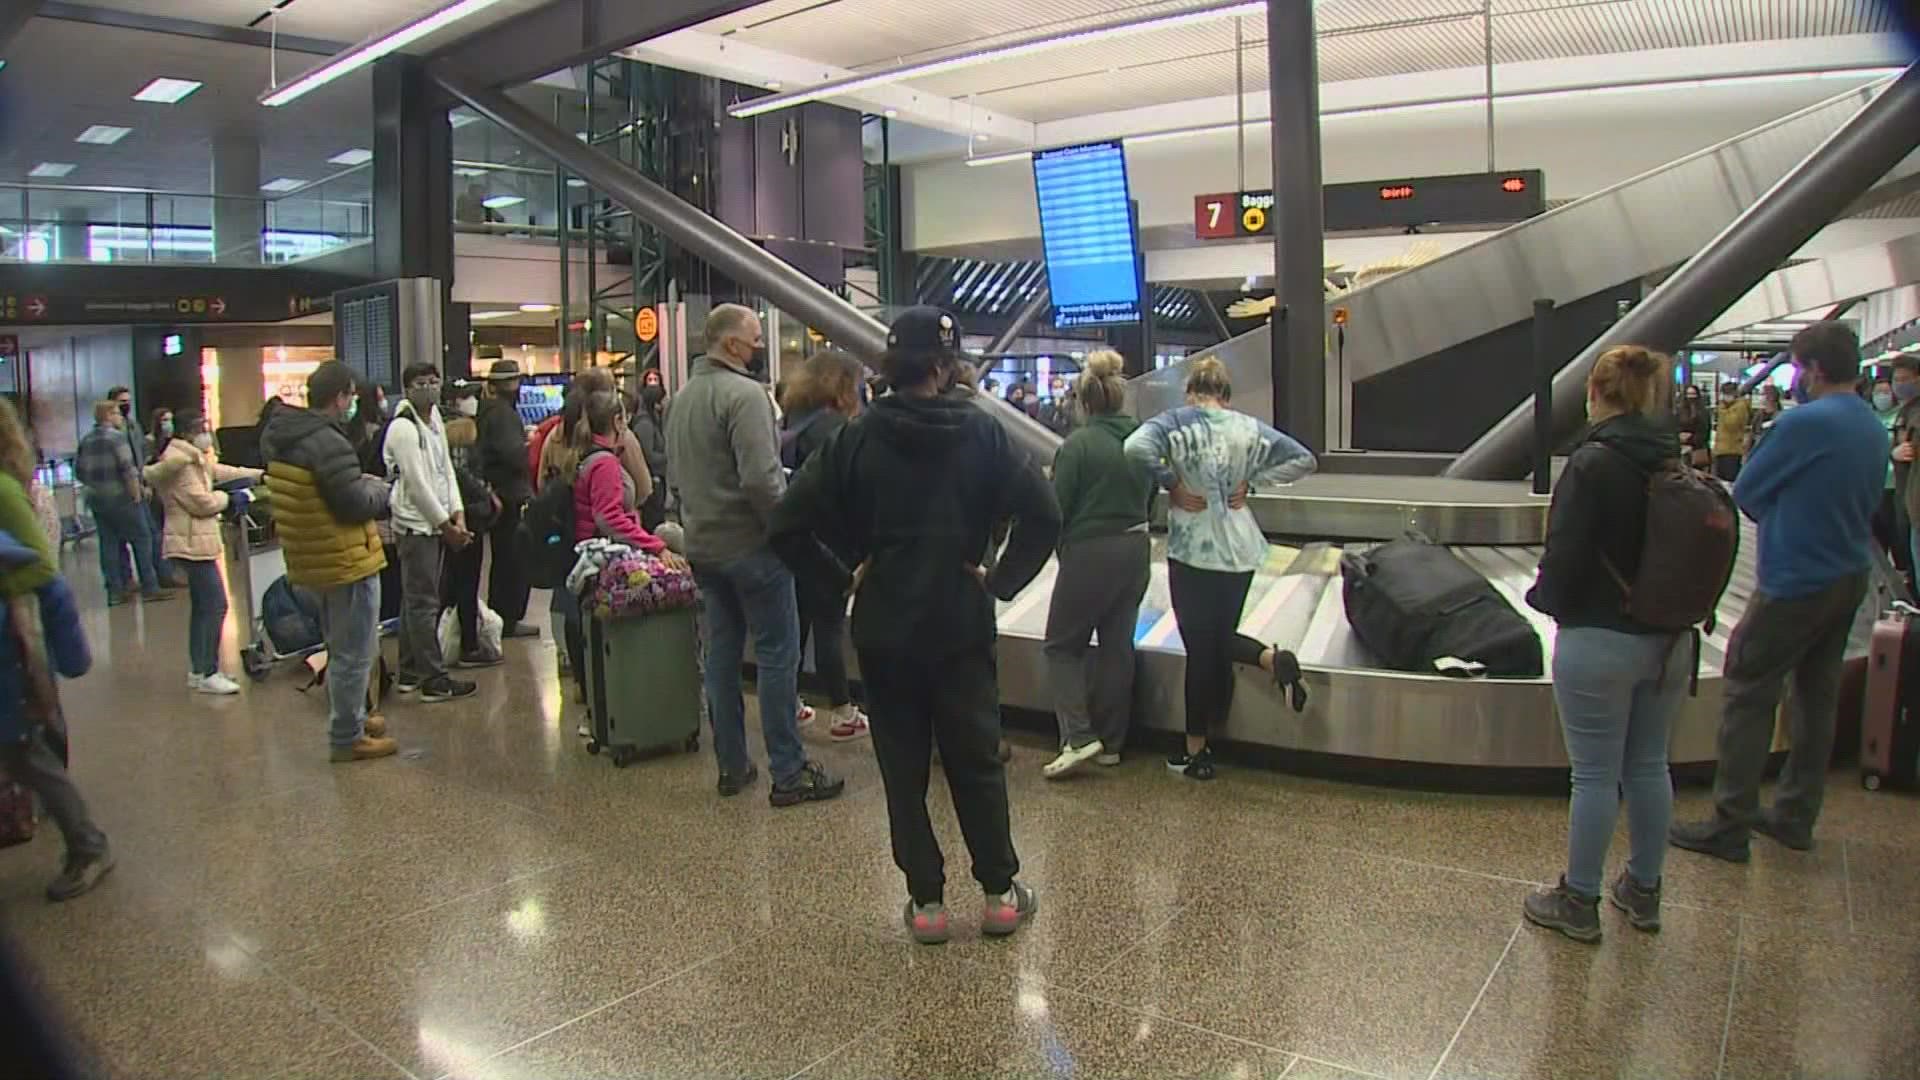 The cancellations and delays just added to the despair felt over the weekend by holidays travelers trying to get home.